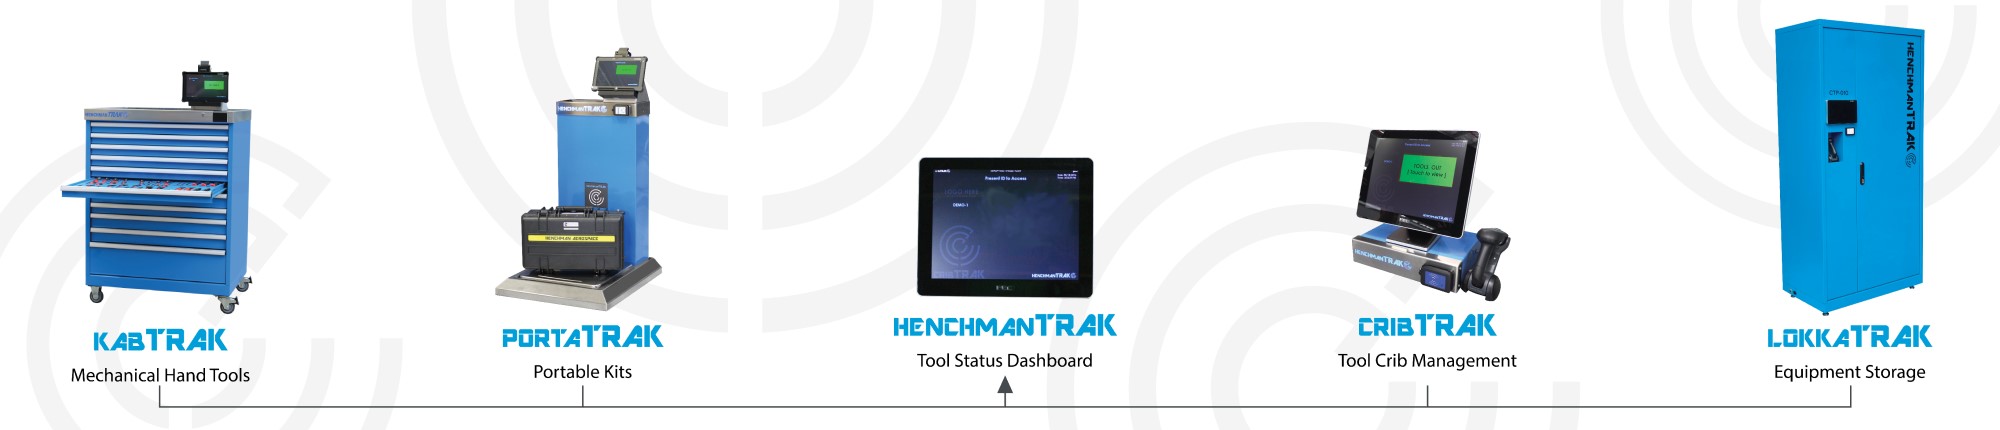 The four HenchmanTRAK Tool Control Solutions